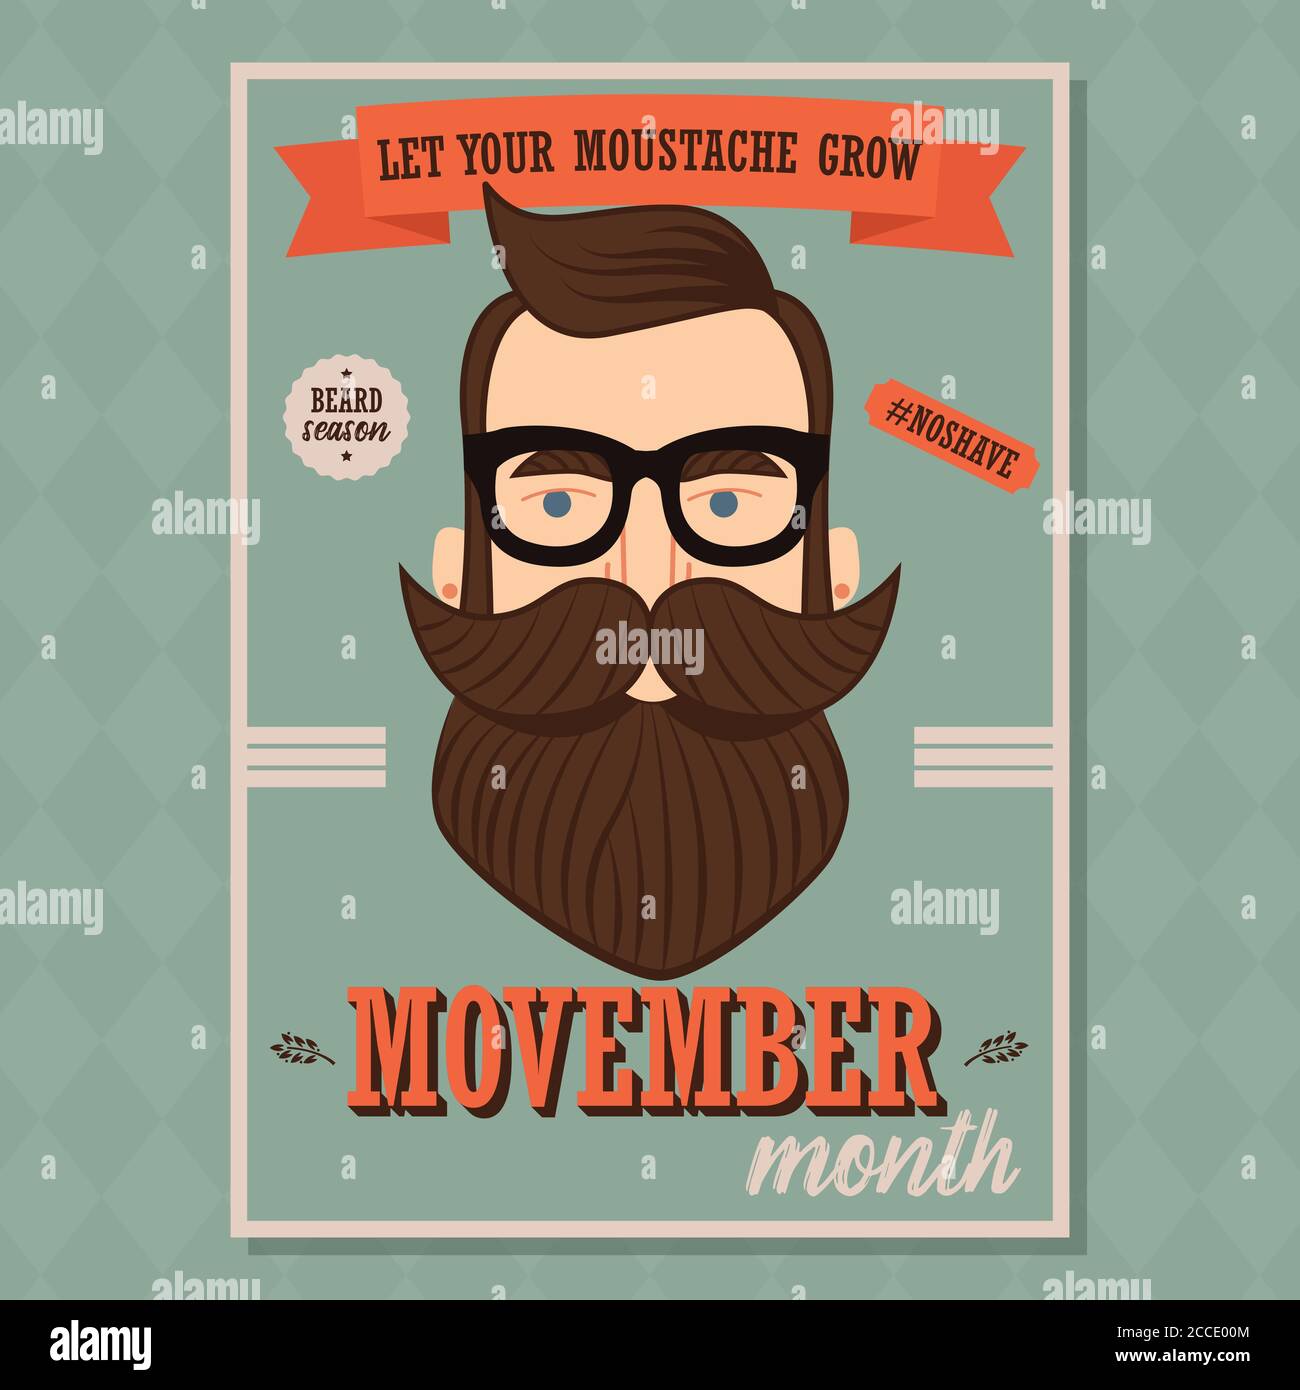 https://c8.alamy.com/comp/2CCE00M/movember-poster-design-prostate-cancer-awareness-hipster-man-with-beard-and-moustache-vector-illustration-2CCE00M.jpg